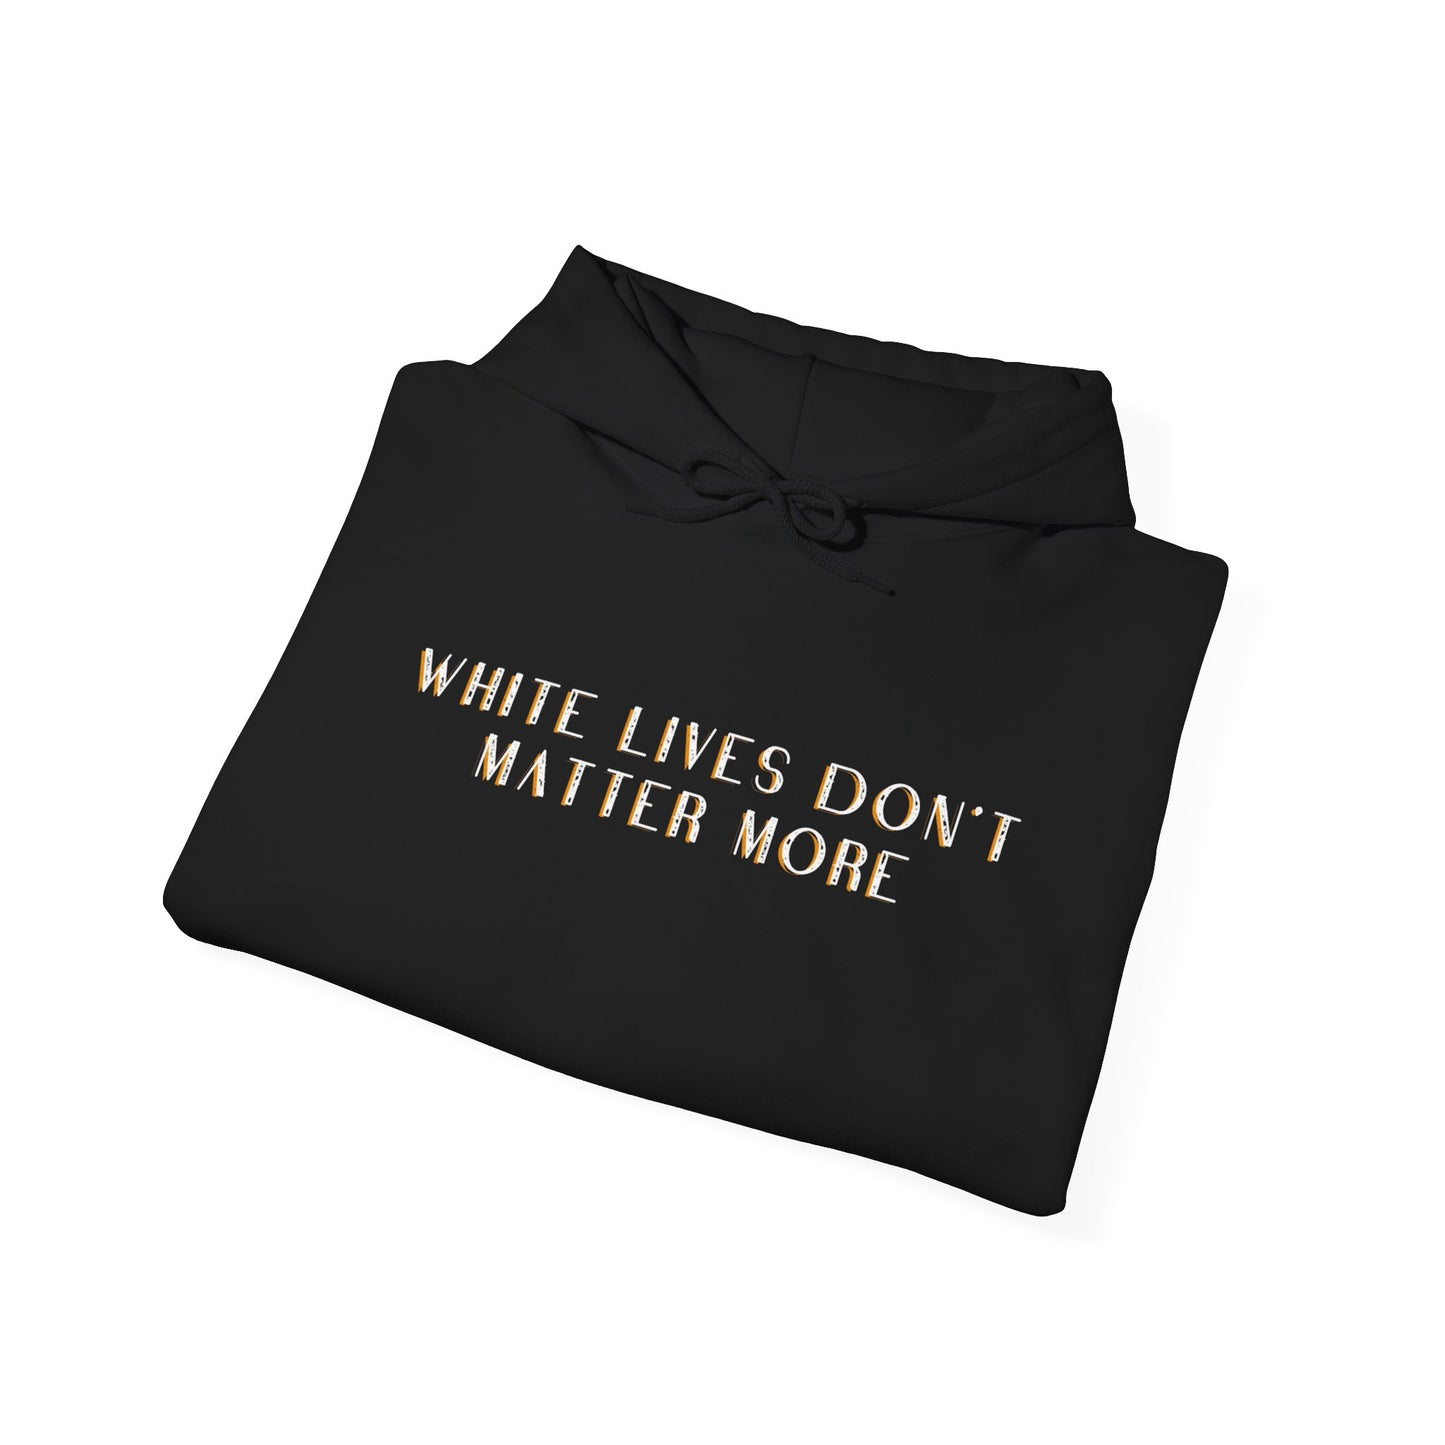 "White Lives Don't Matter More" HOODY Sweatshirt with Bold Text, No Graphic